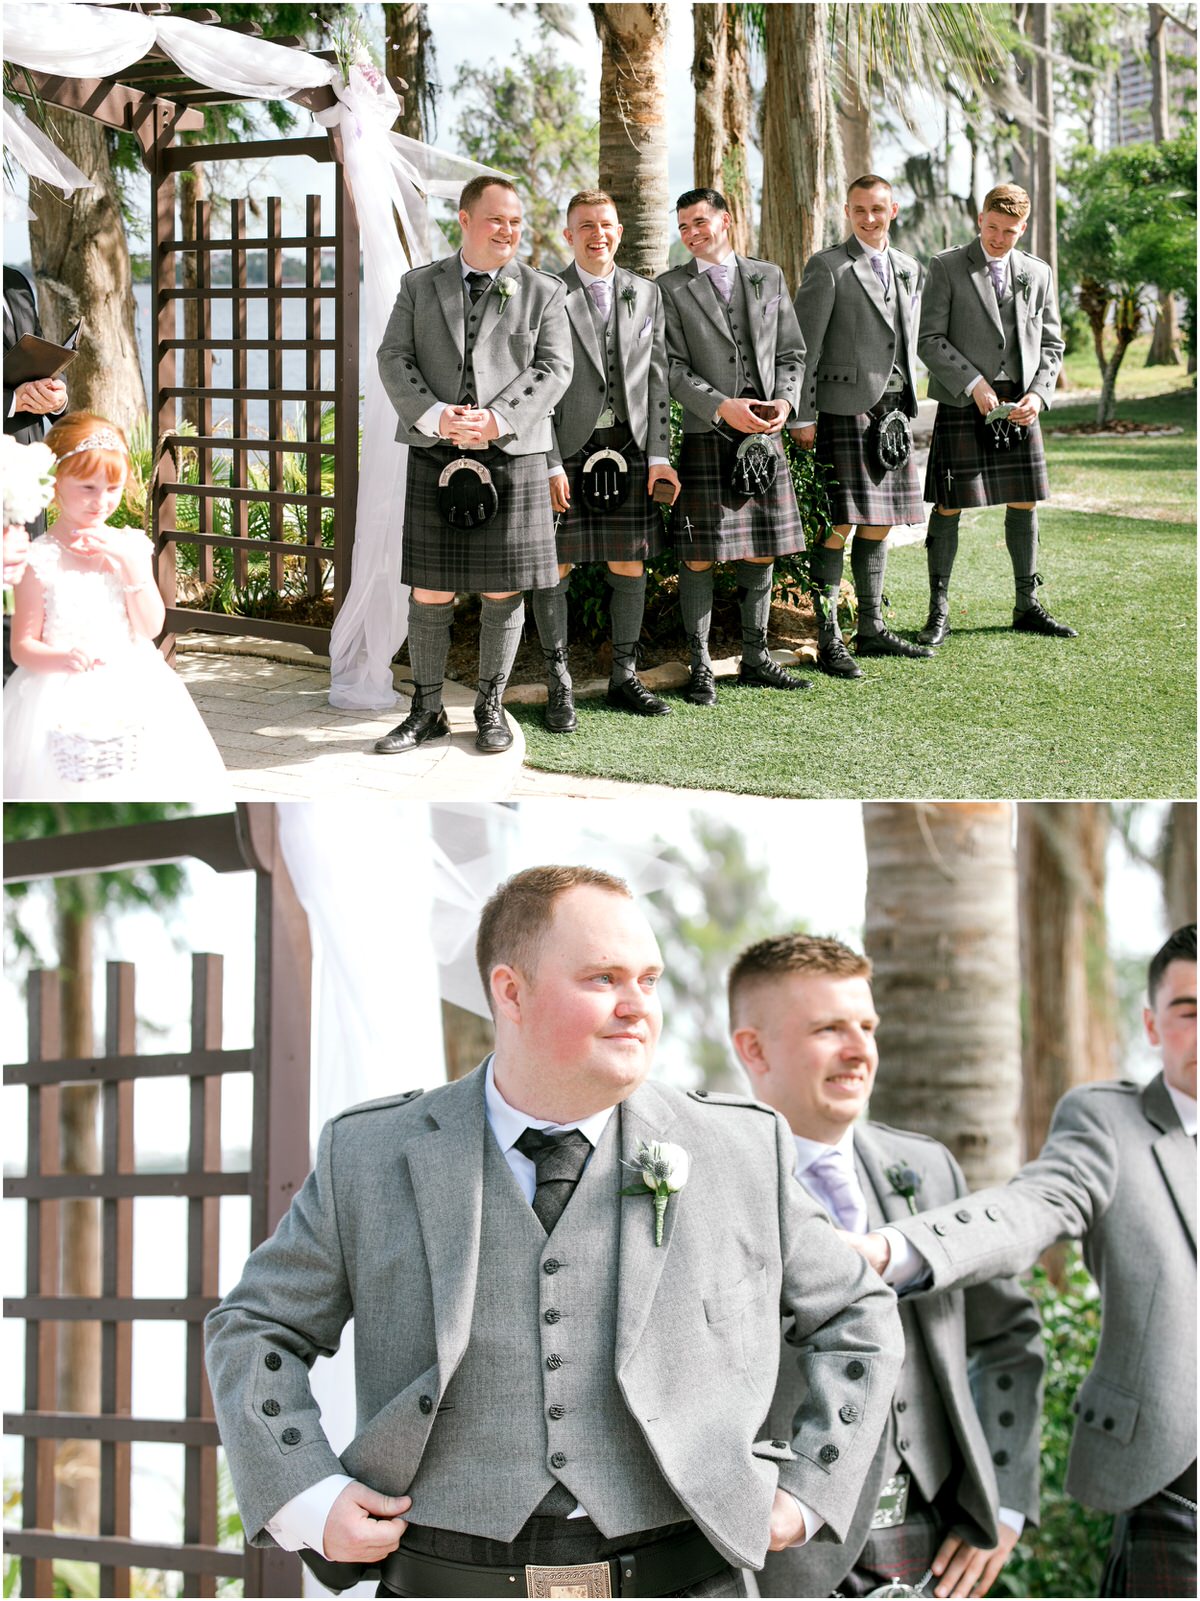 Groomsmen supporting the groom as the bride walks down the aisle.